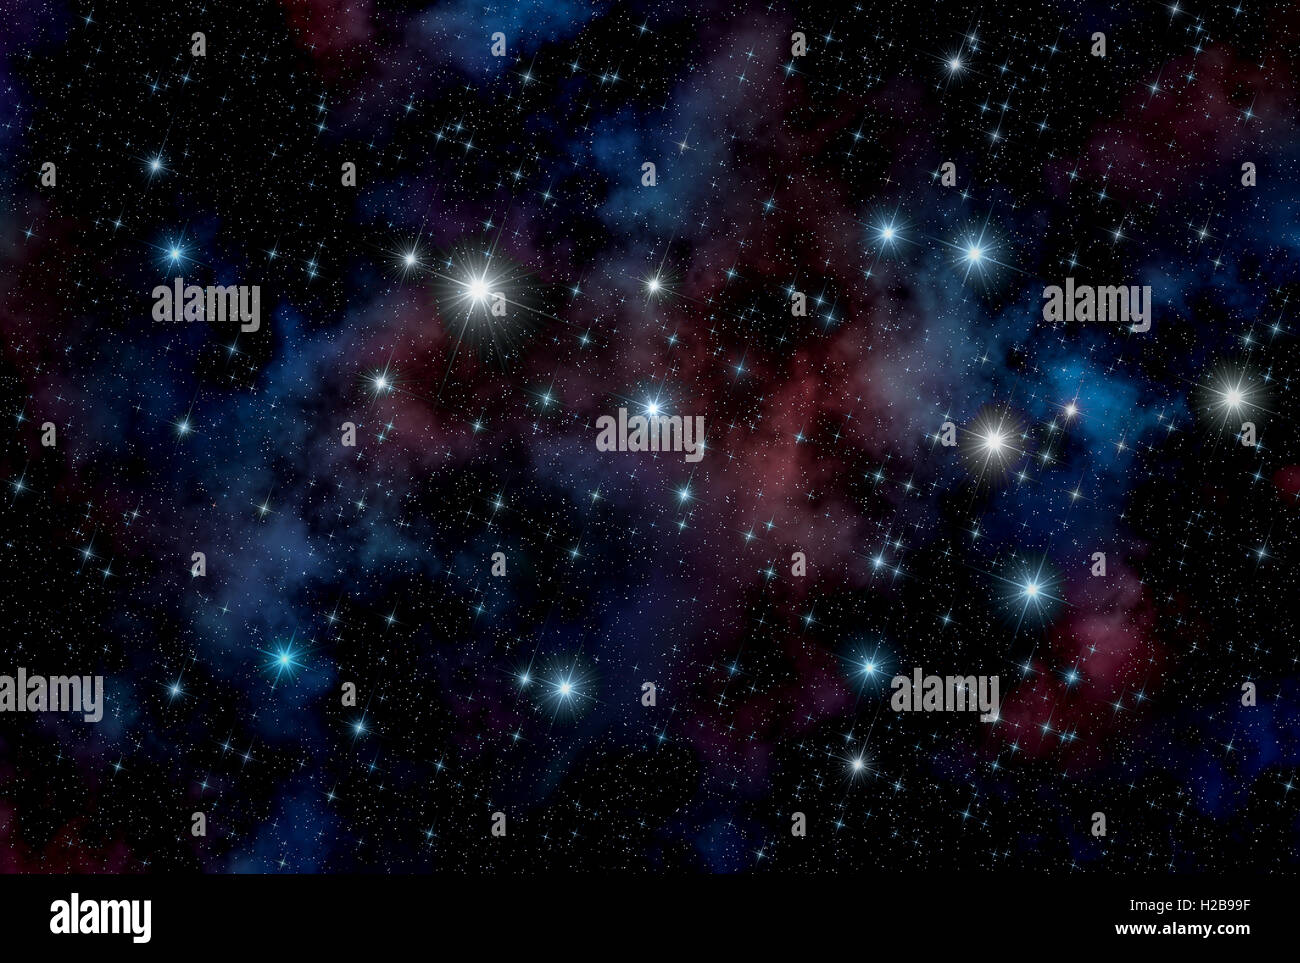 Illustration that shows an universe concept with space crowded by variegated twinkled sparking stars and nebulae. Stock Photo